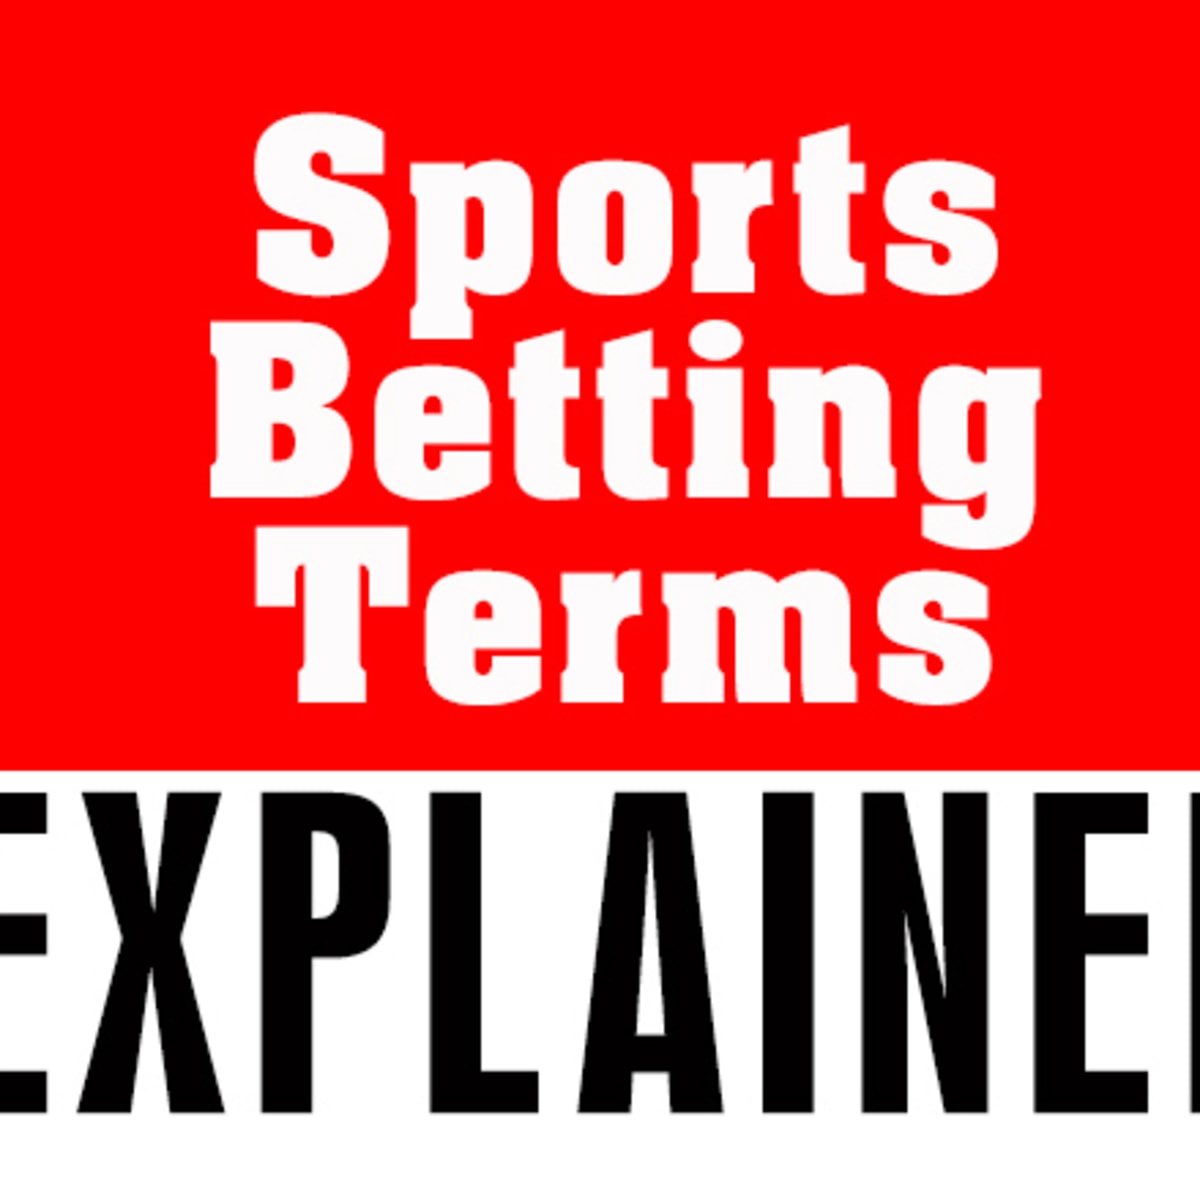 Photo: sports betting terms